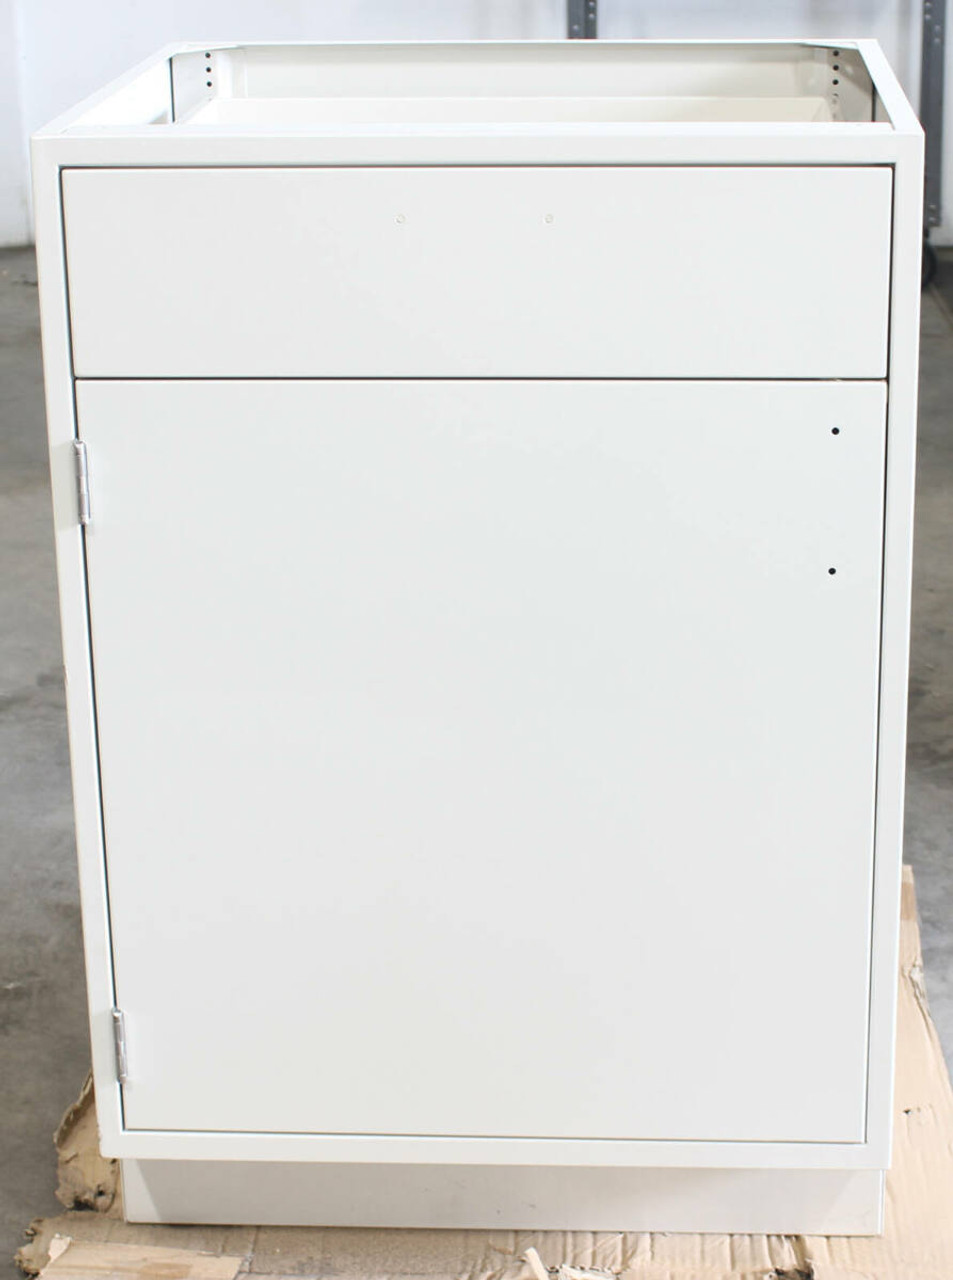 ICI Quick Ship CPJTP169-24P Sitting Height Base Cabinet Left Hinged, 1 Door 1 Drawer, 24 Inches Wide x 36 Inches Tall x 21-5/8 Inches Deep, ICI Number: 137S4320.